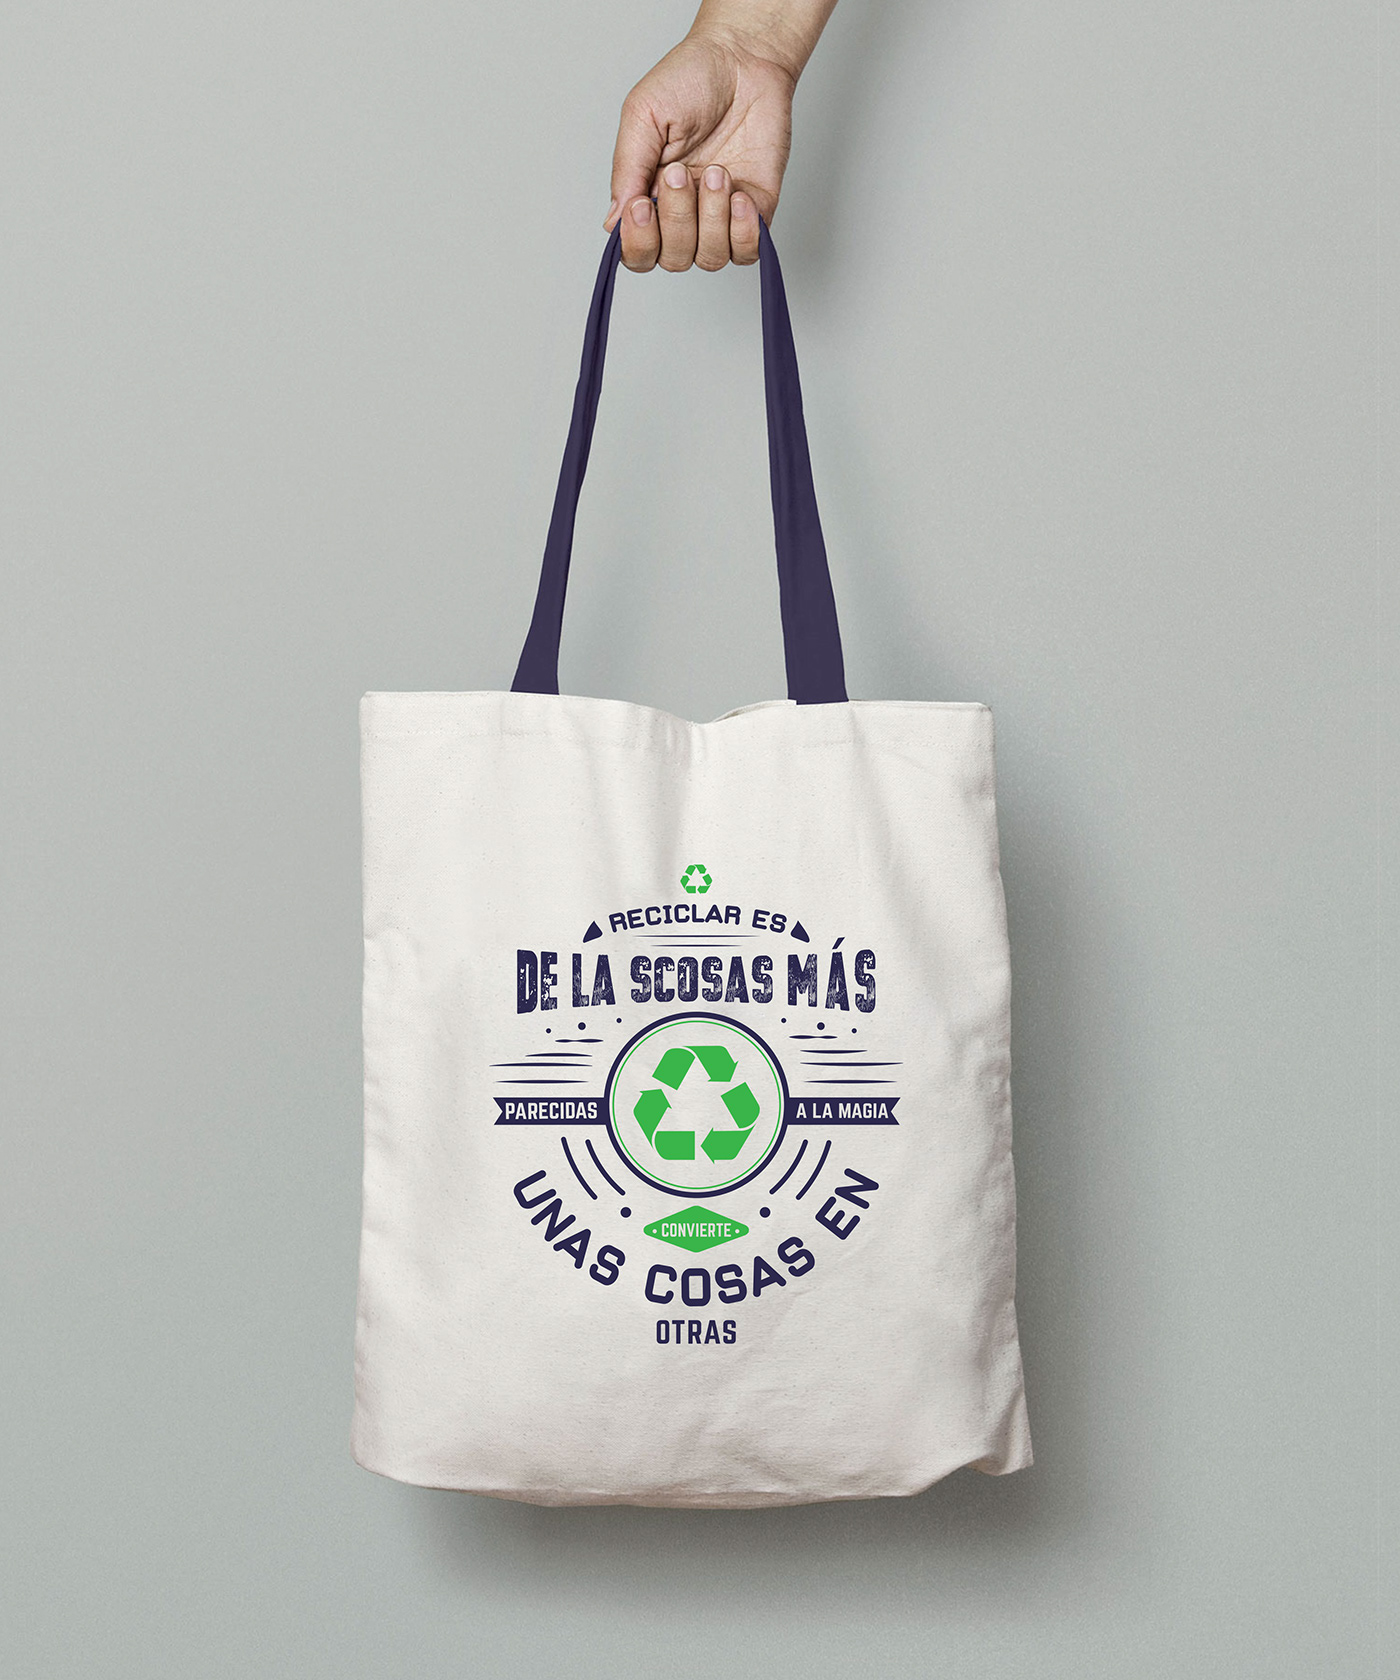 Go Green Graphic Desgn recycle save earth sketches Tote Bag Design Tote Bags